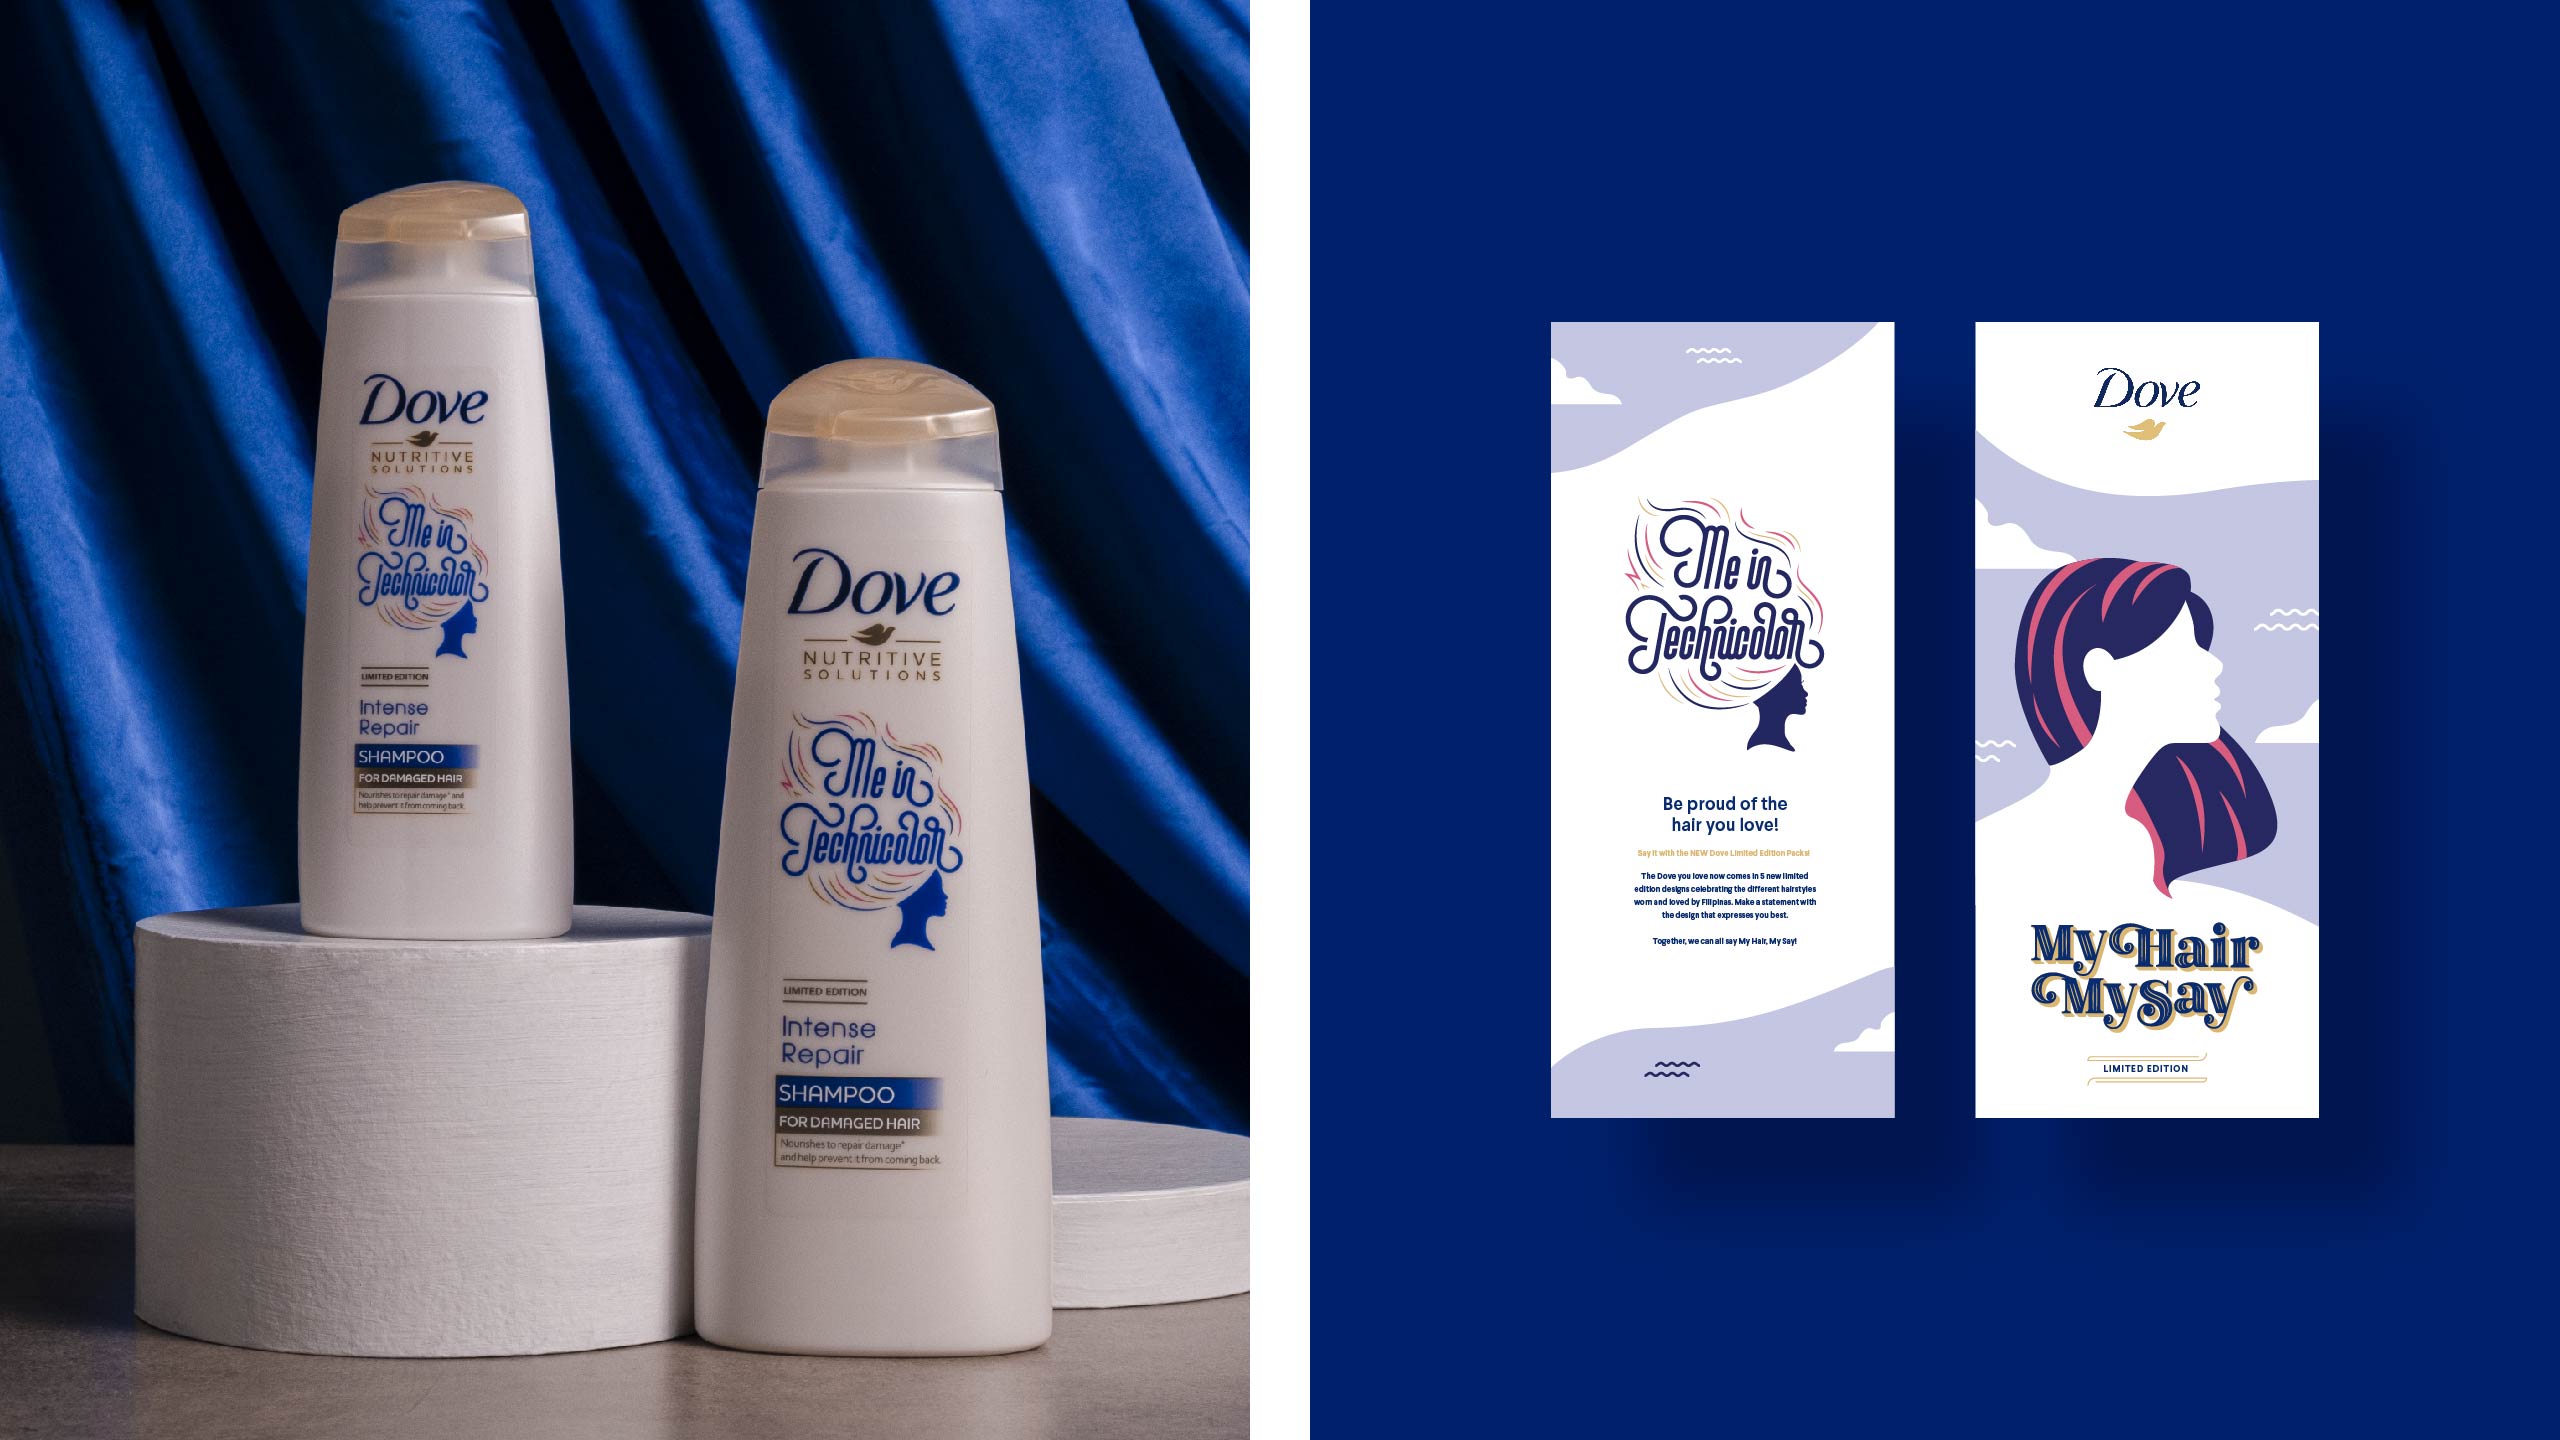 Studio photography of custom shampoo bottle and box packaging designs for Dove My Hair My Say campaign